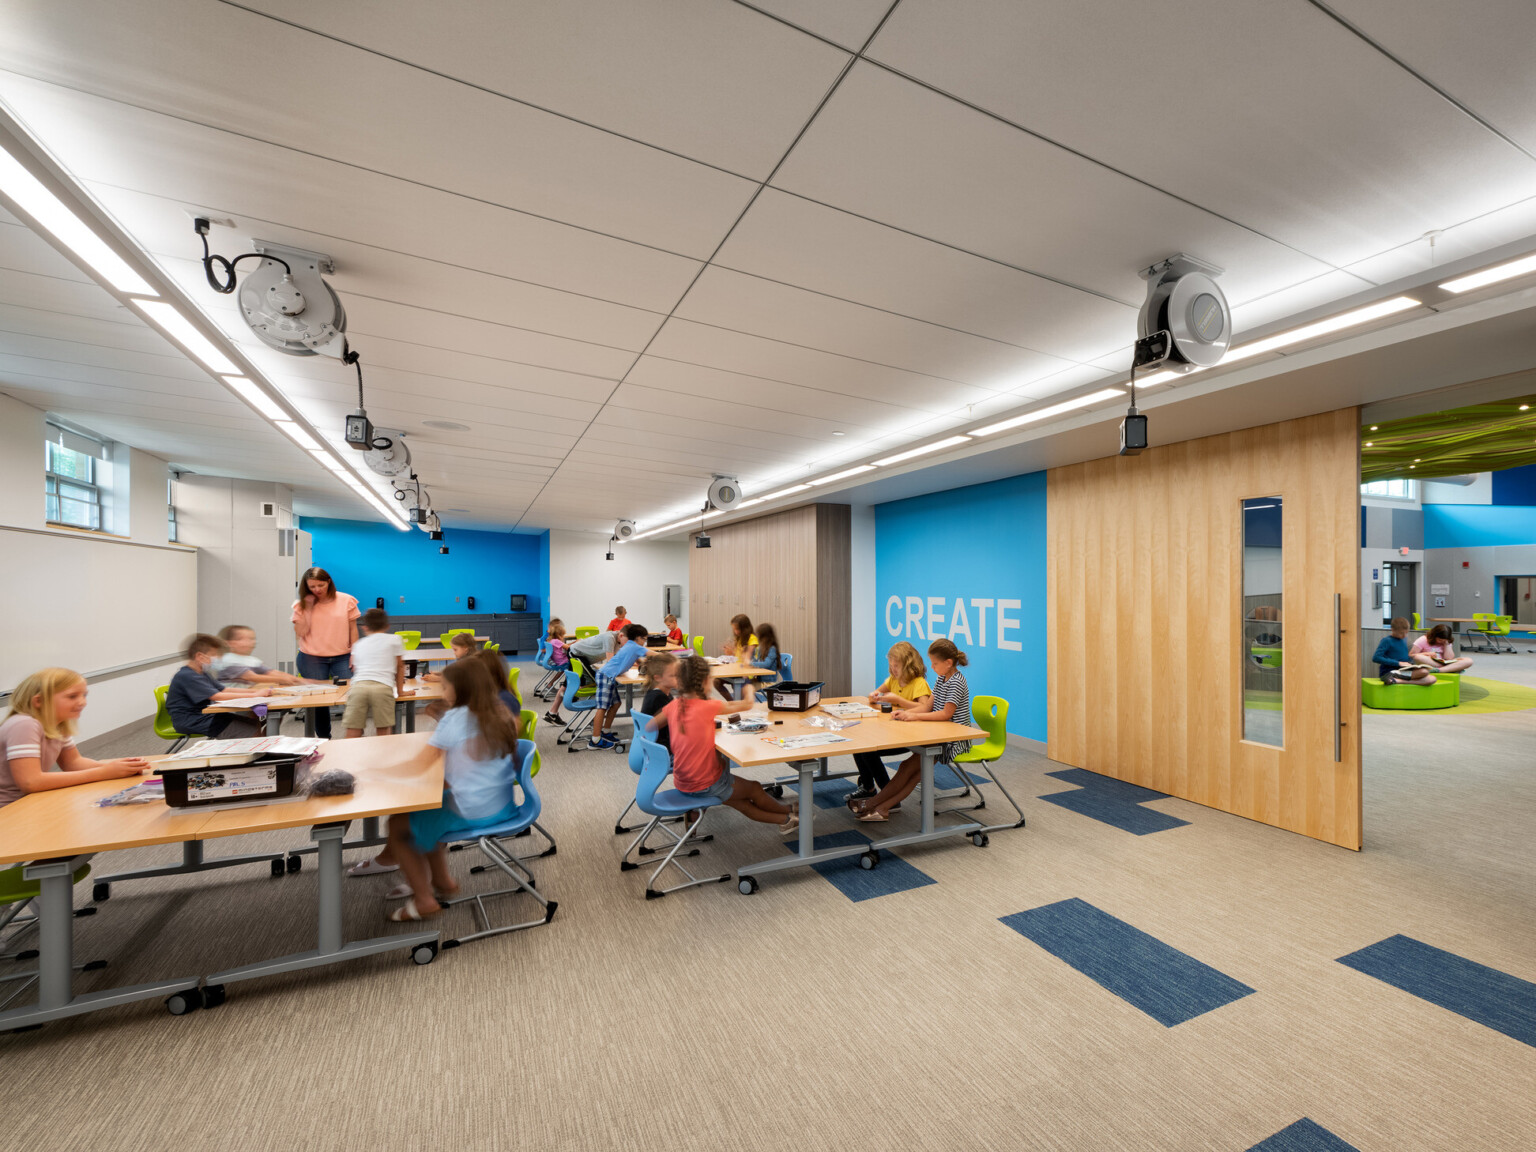 Long classroom with wood sliding door to open space, blue accent way with mural reading create